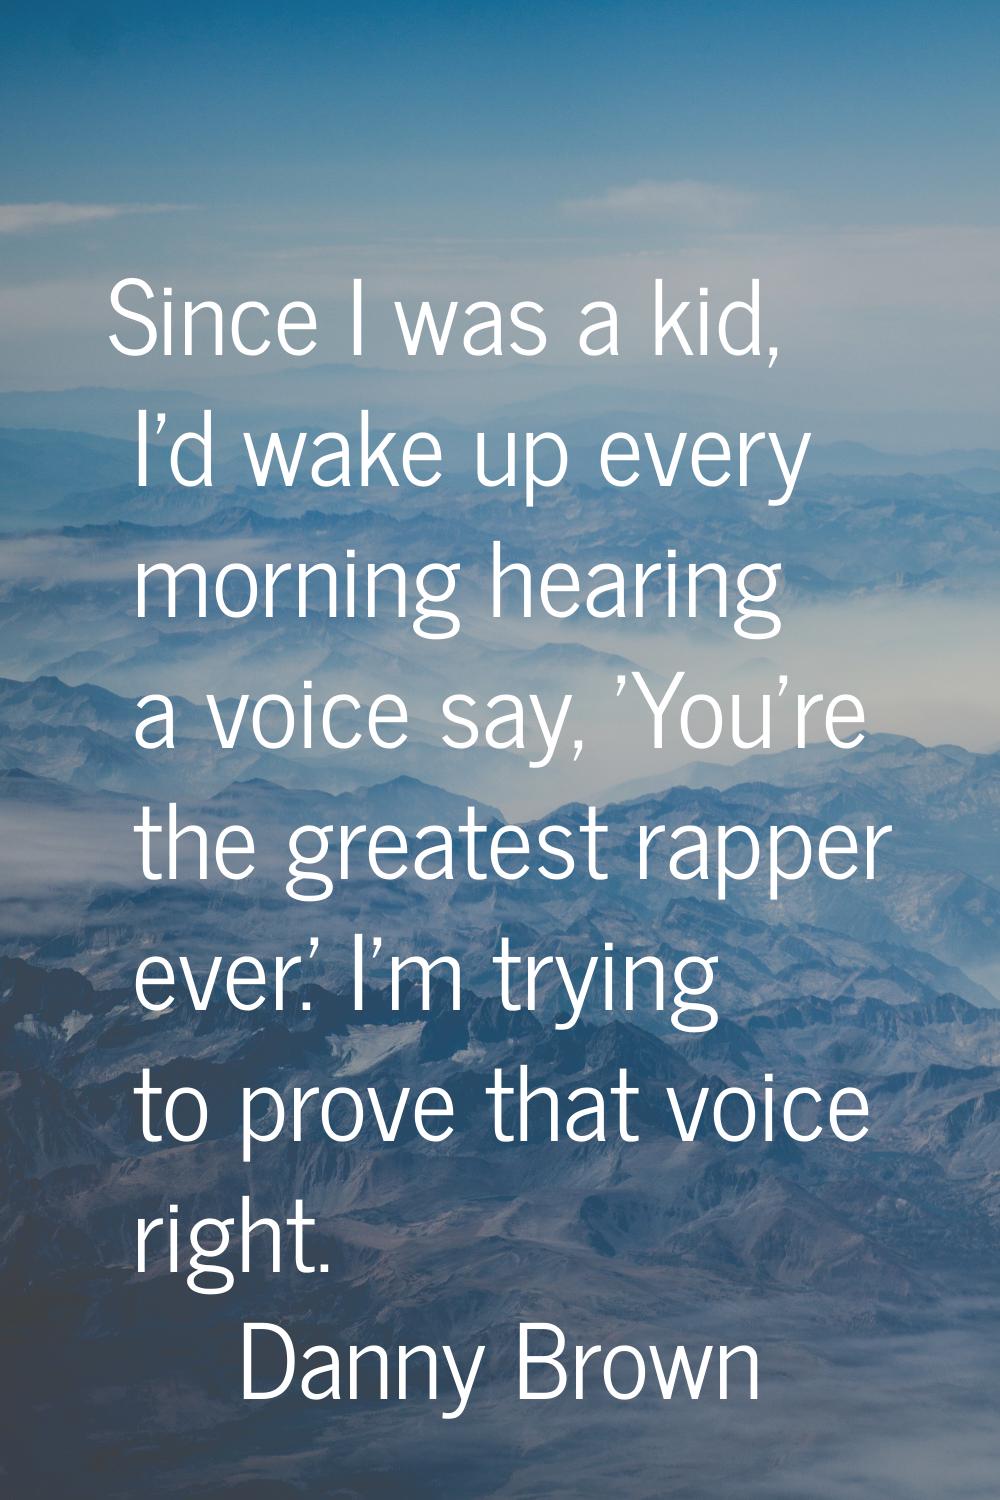 Since I was a kid, I'd wake up every morning hearing a voice say, 'You're the greatest rapper ever.